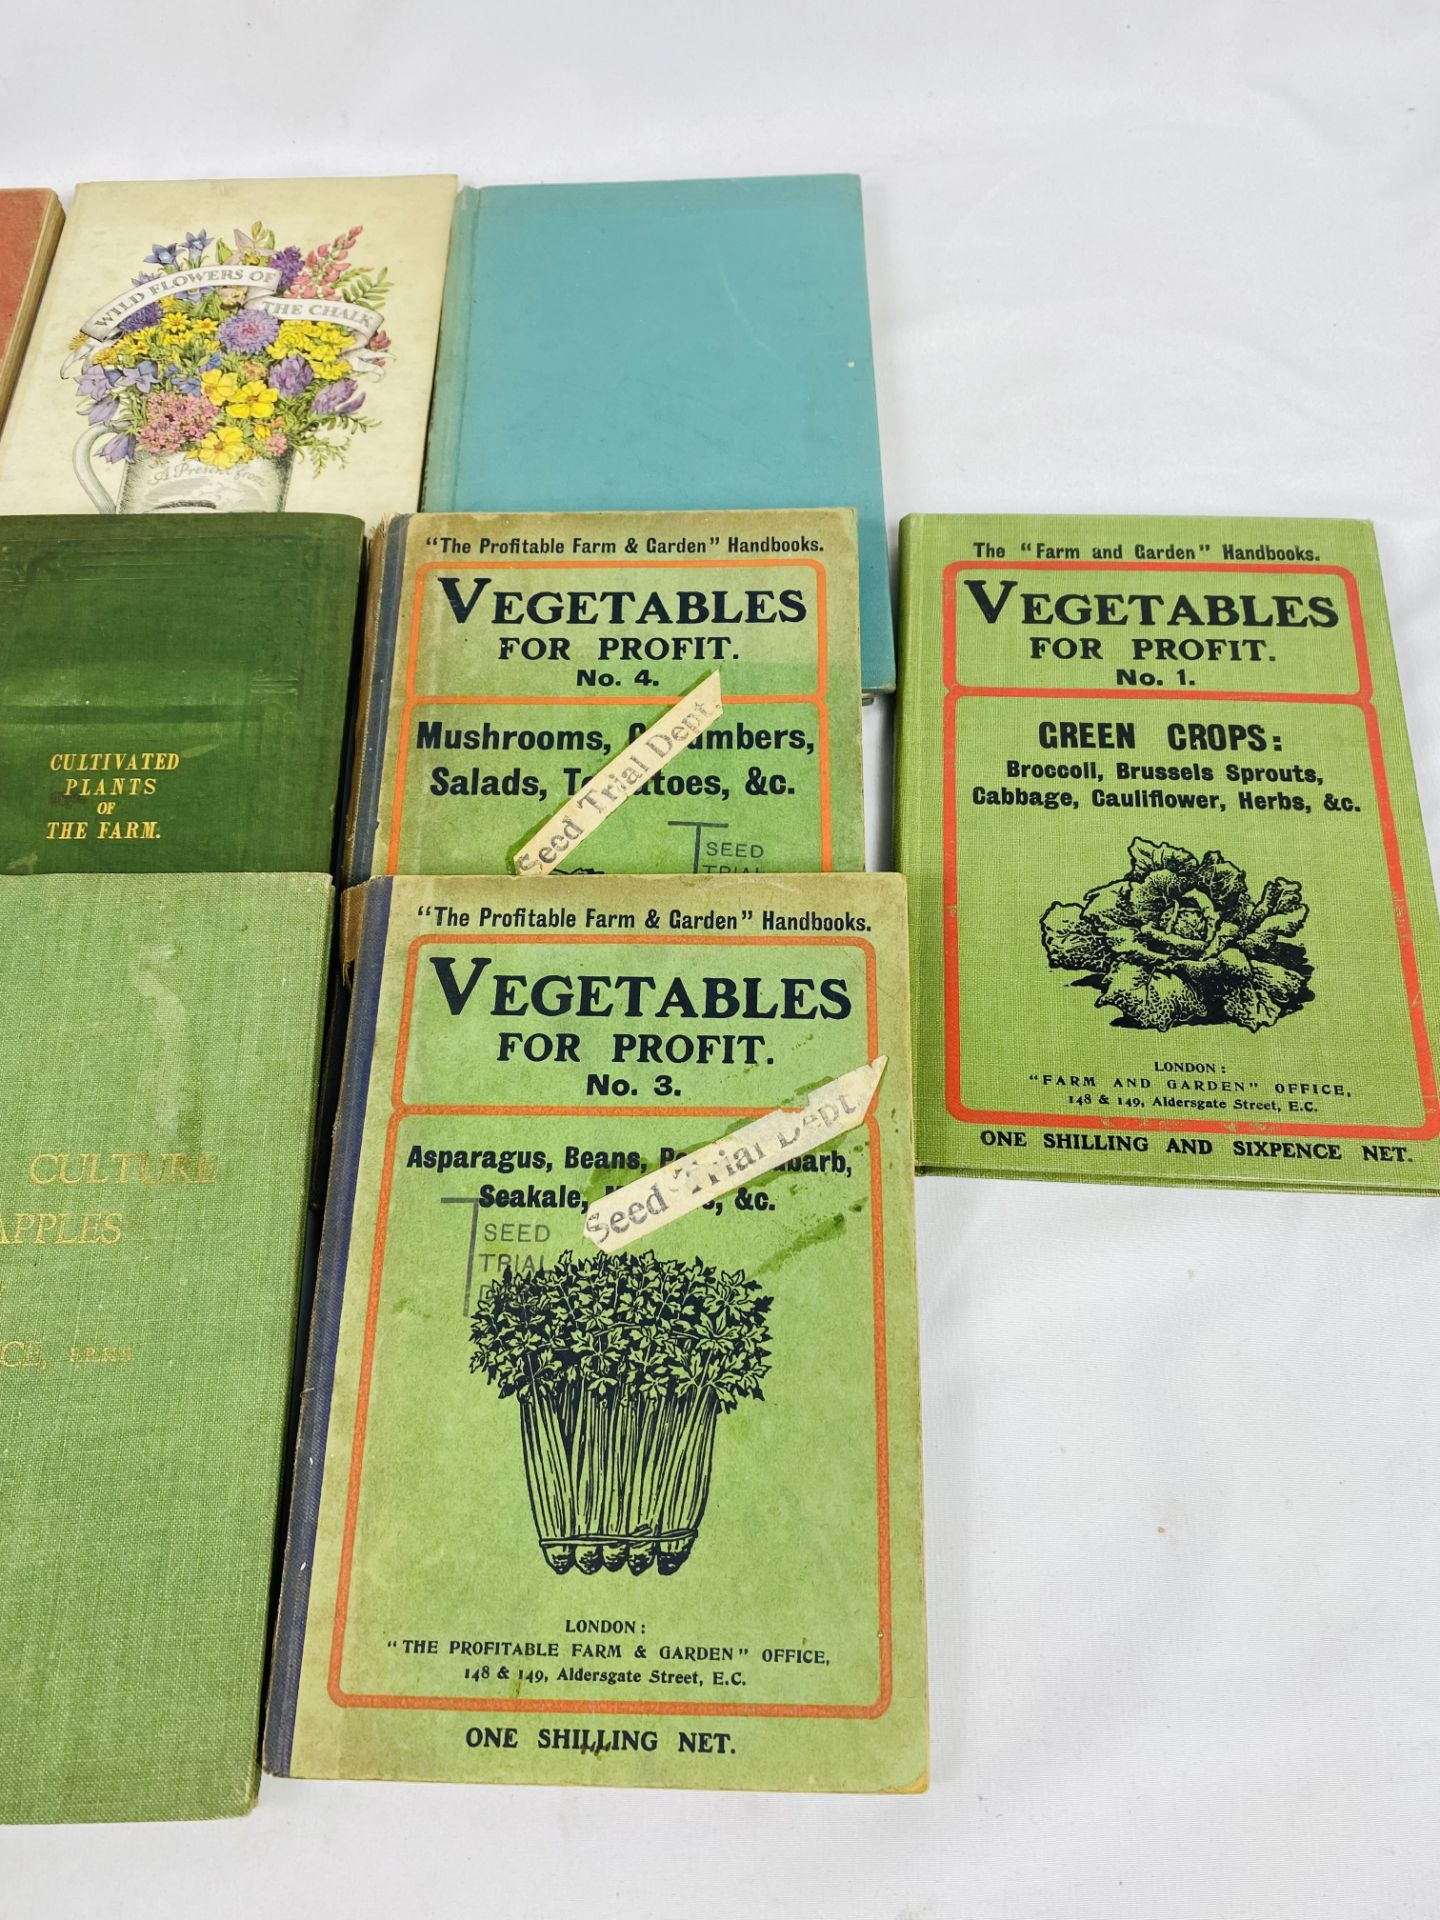 Collection of books on vegetable and flower growing - Image 2 of 3